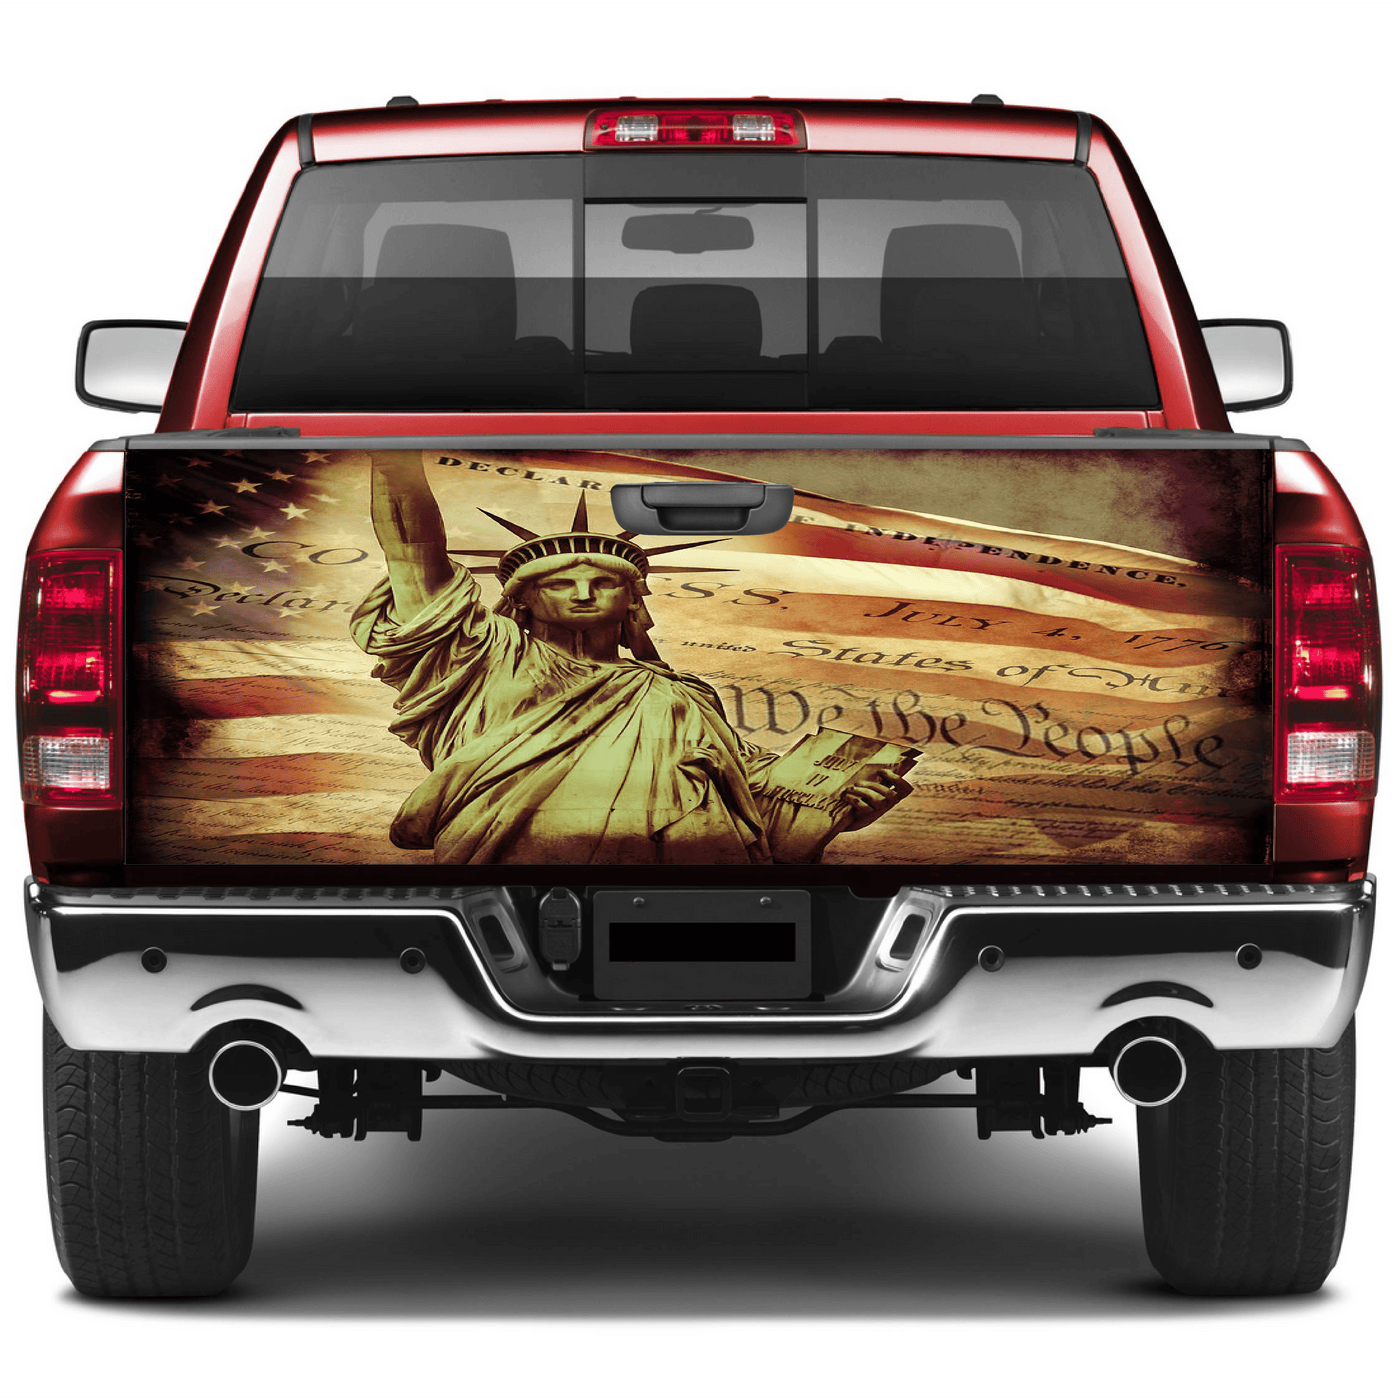 American Flag Tailgate Wrap We The People Wraps For Trucks Wrap Vinyl Car Decals SUV Sticker